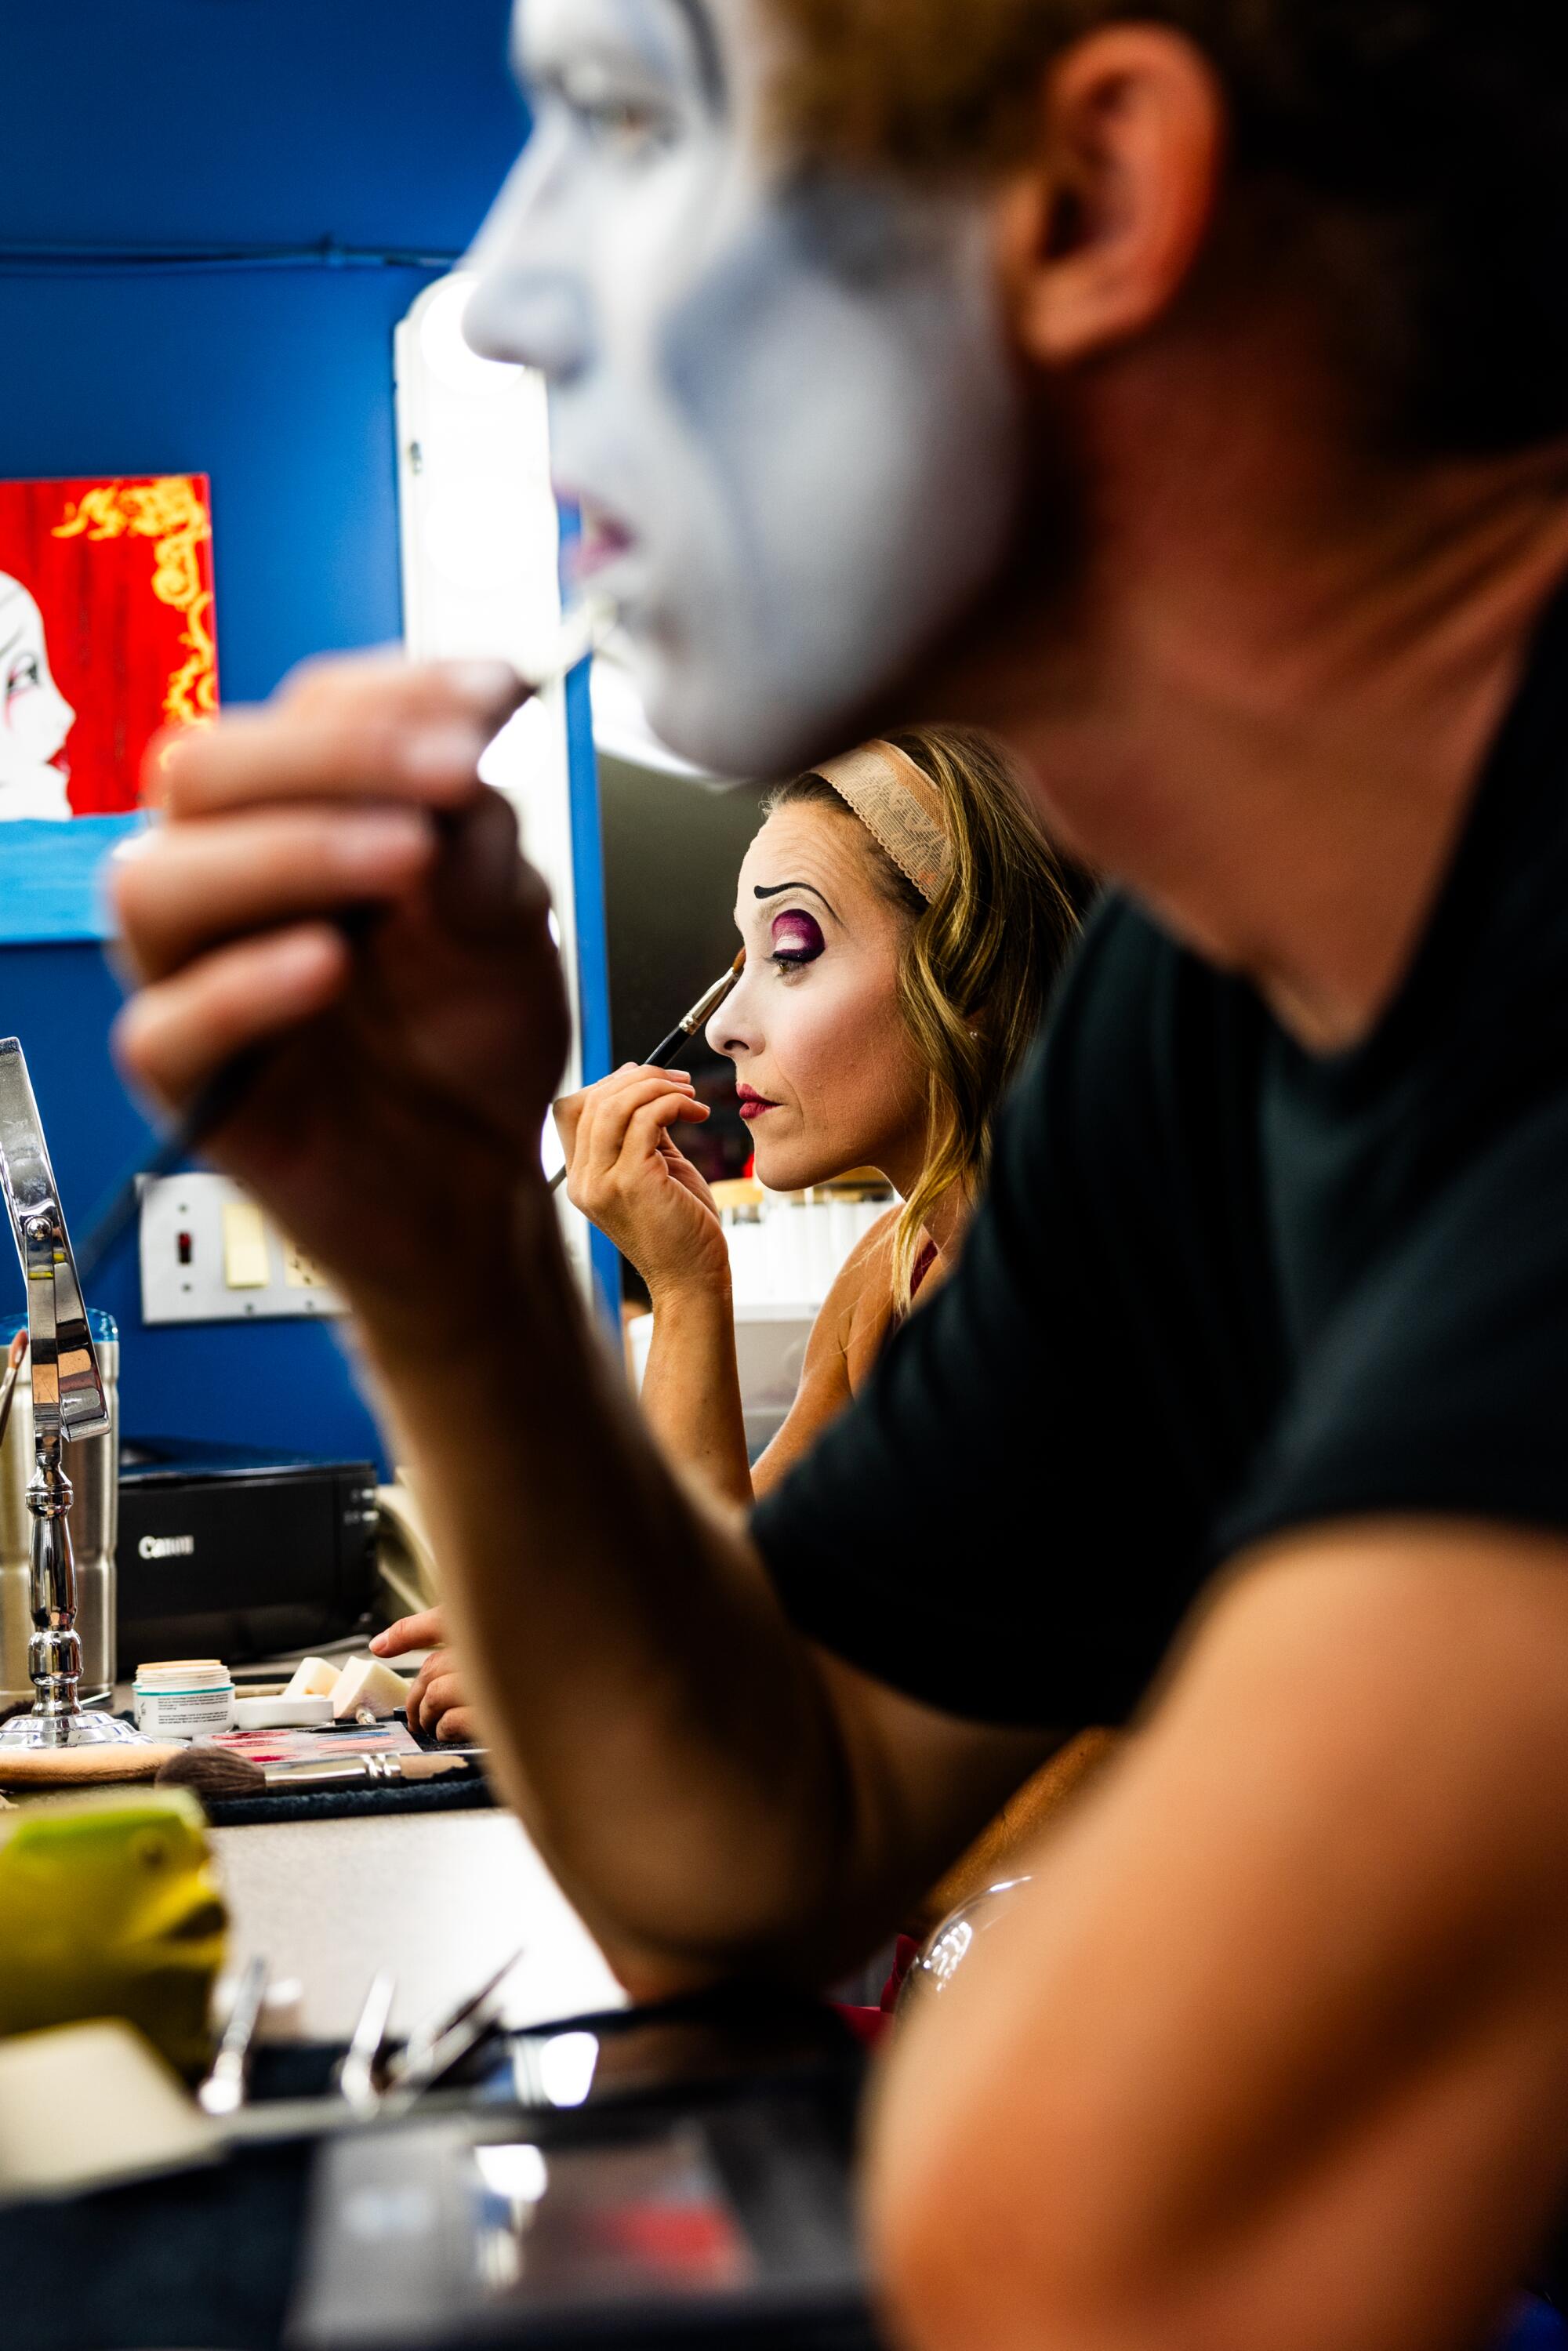 Two Cirque du Soleil performers apply makeup backstage.